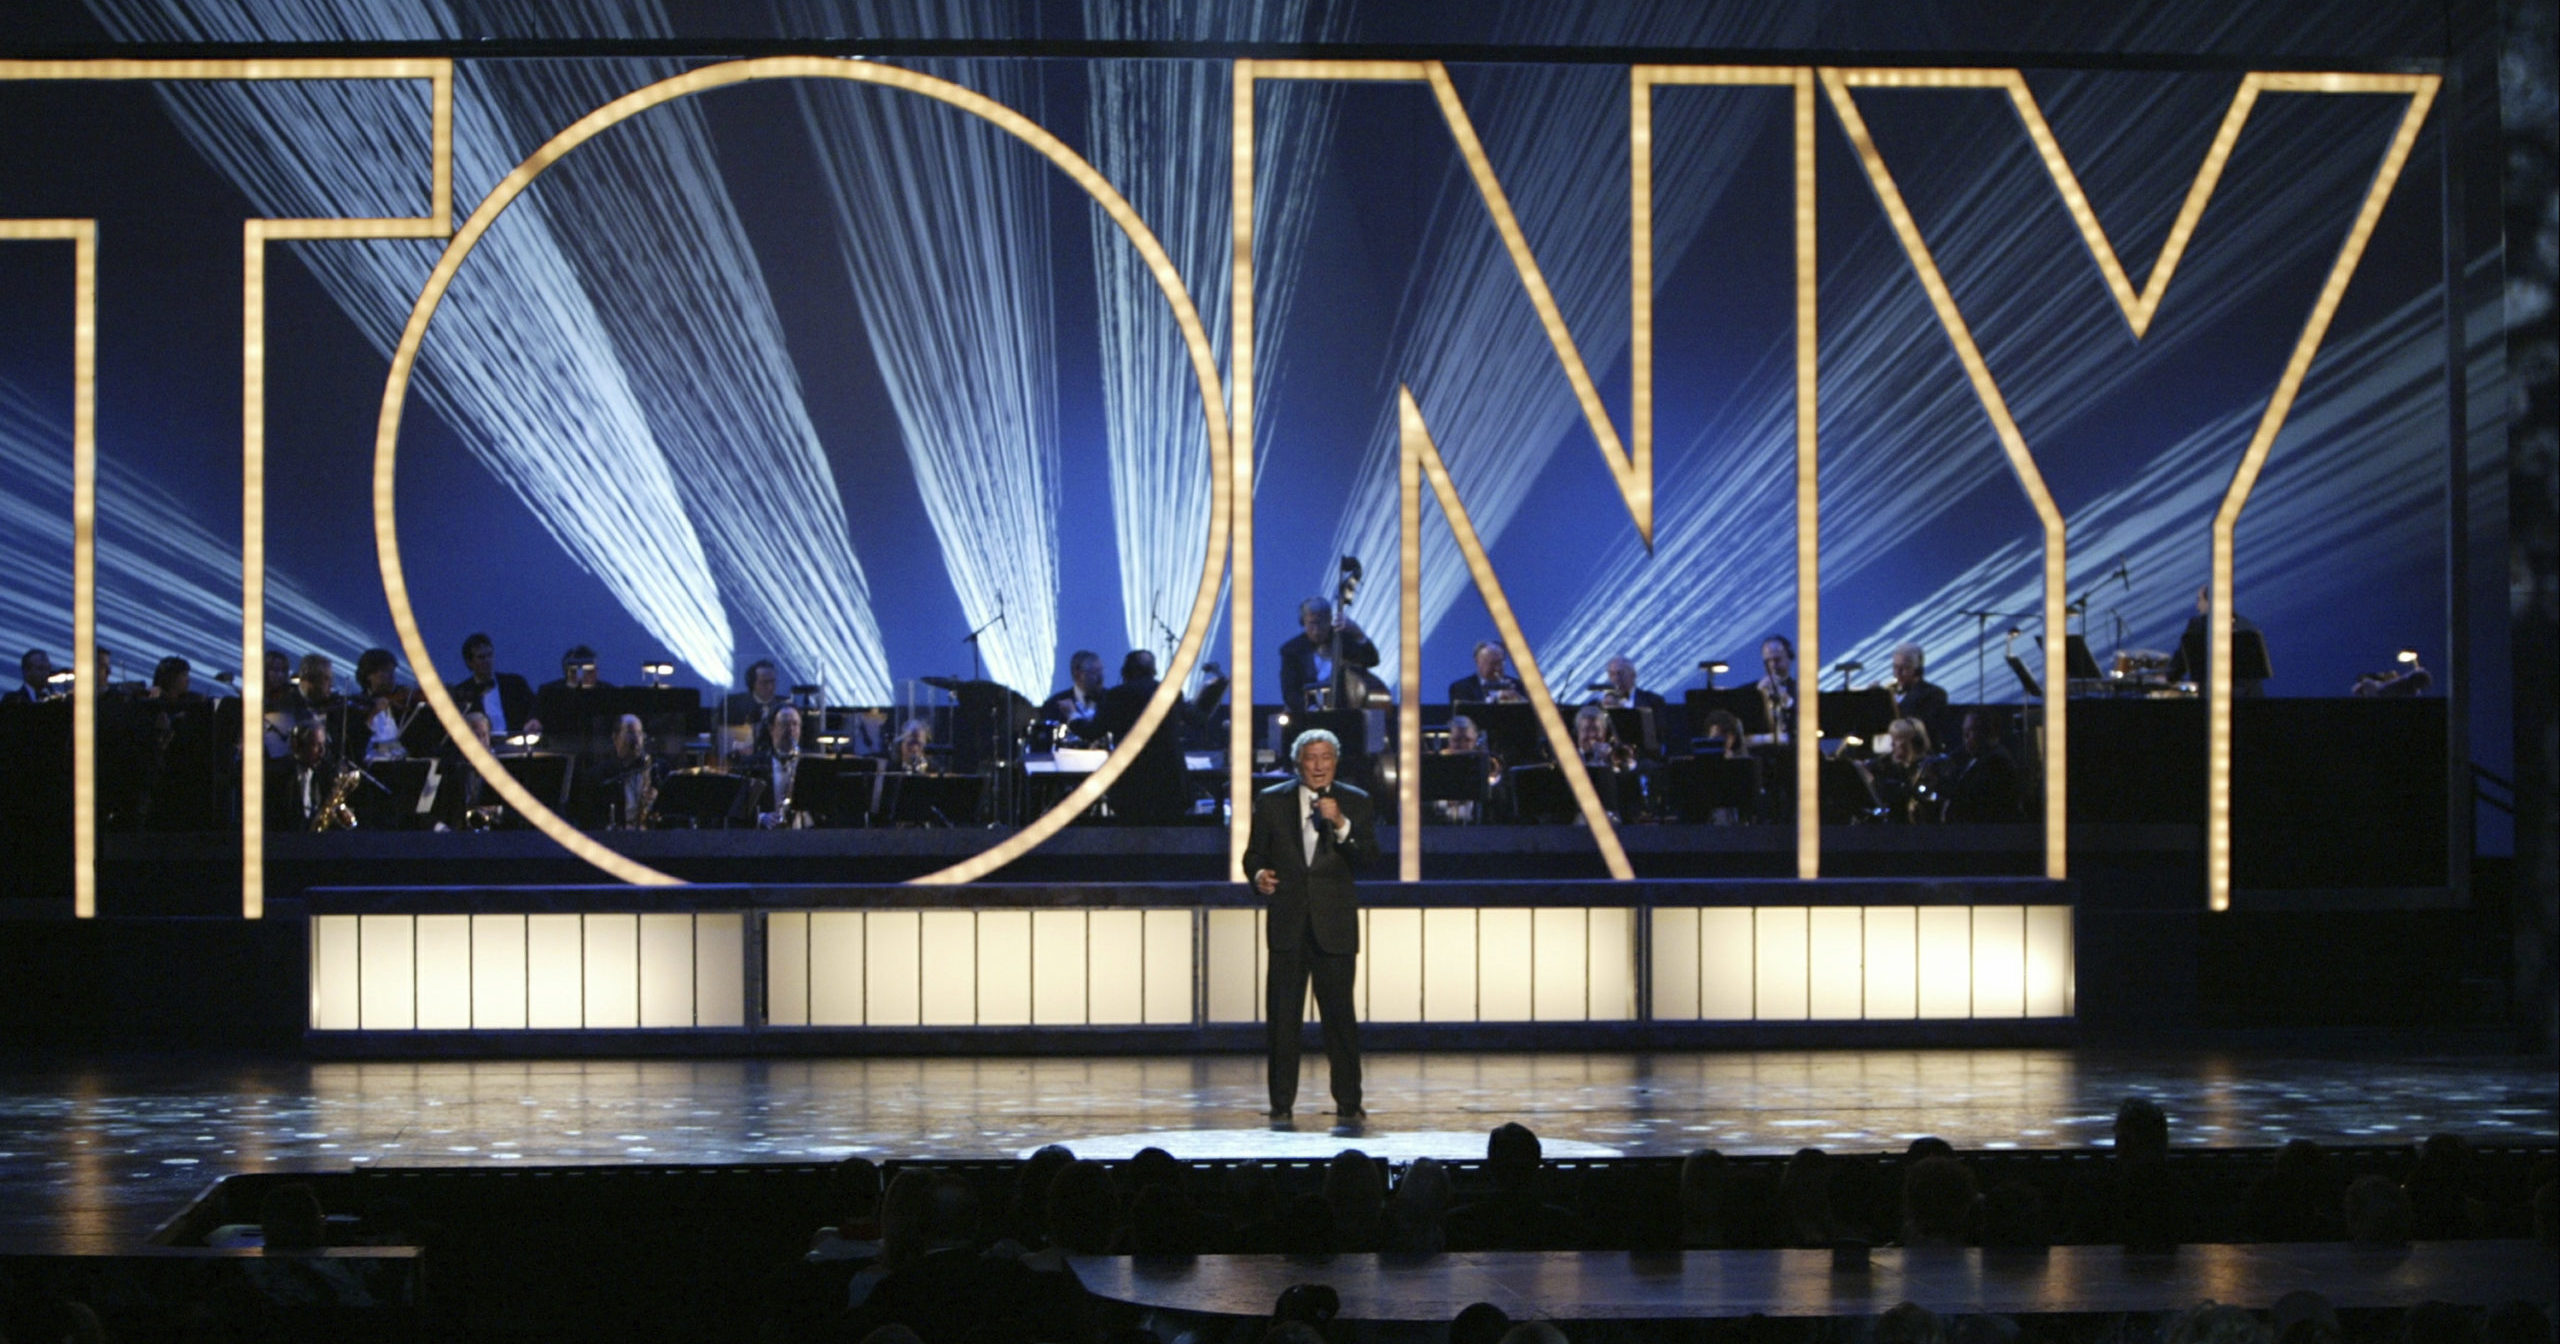 Singer Tony Bennett performs during the 58th annual Tony Awards at New York's Radio City Music Hall on Sunday, June 6, 2004. Bennett died Friday at age 96.